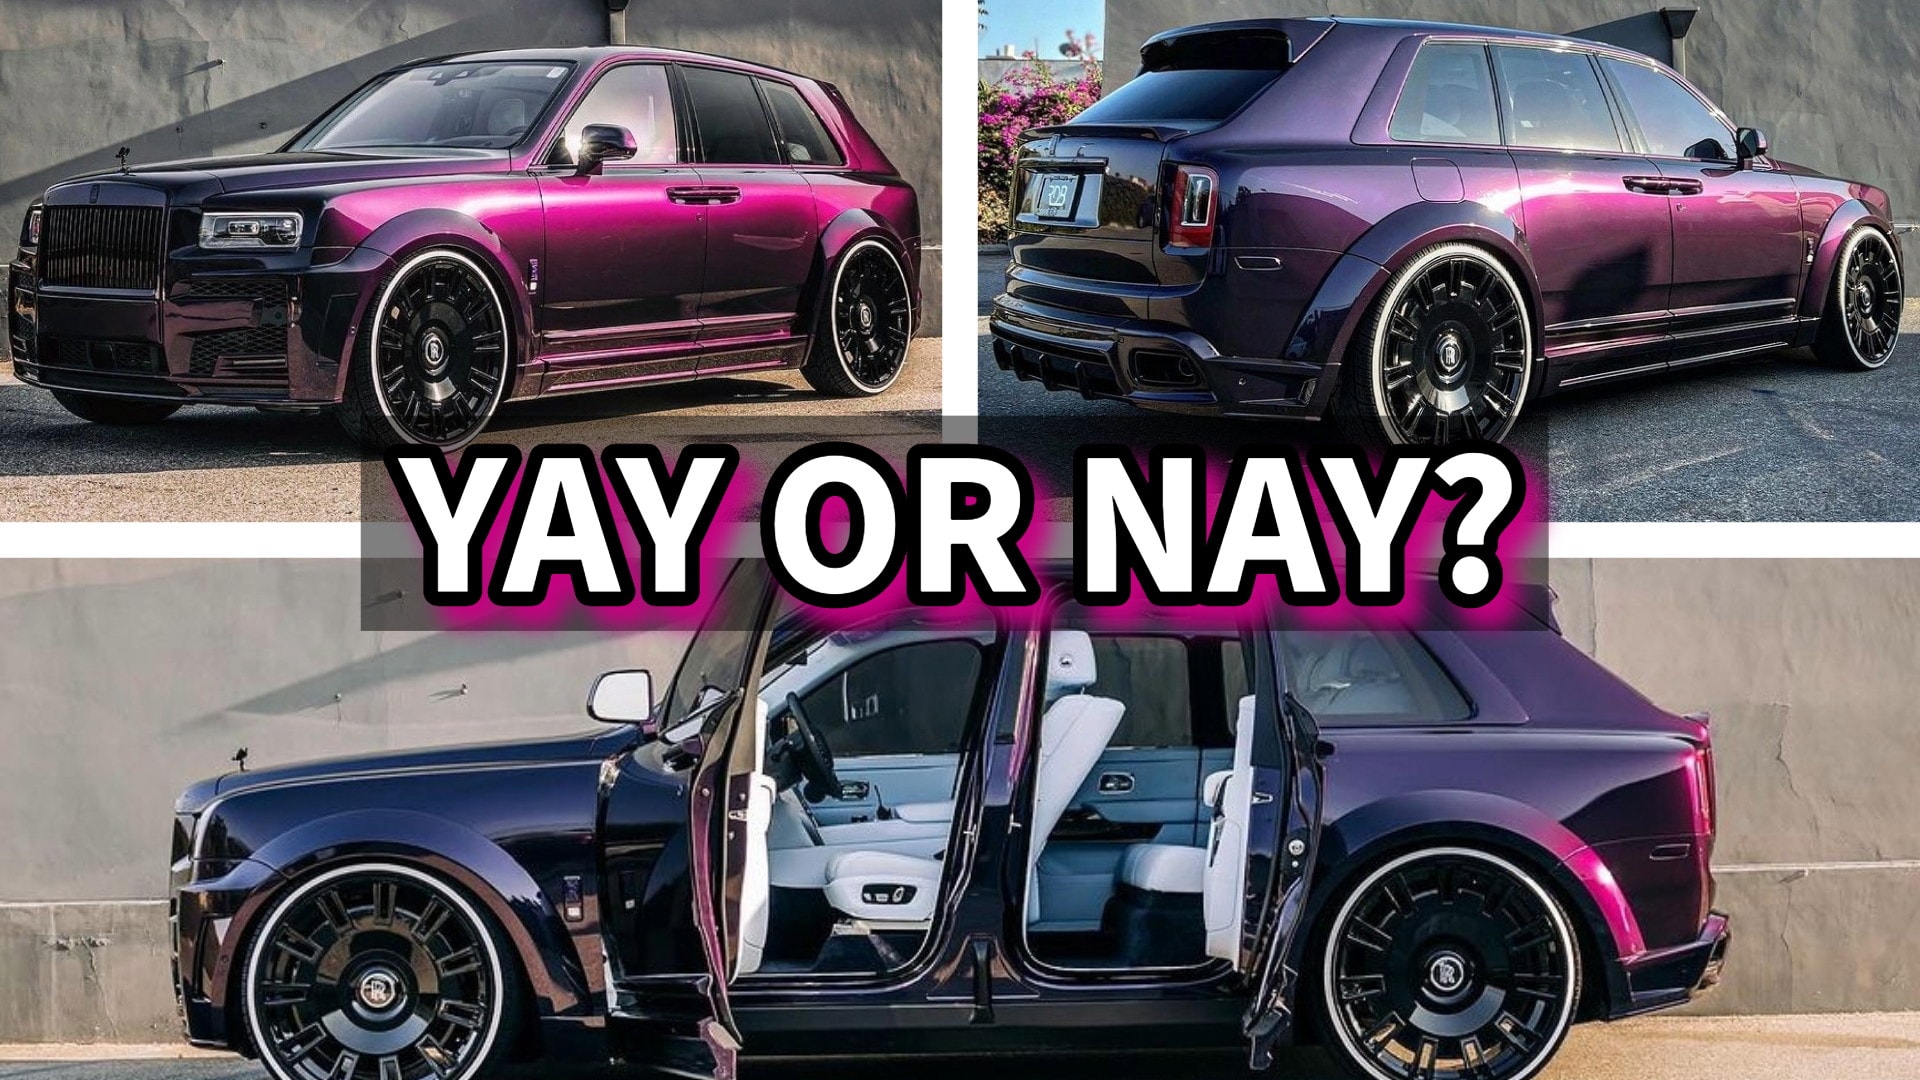 9 Things That Stand Out About the Rolls-Royce Cullinan